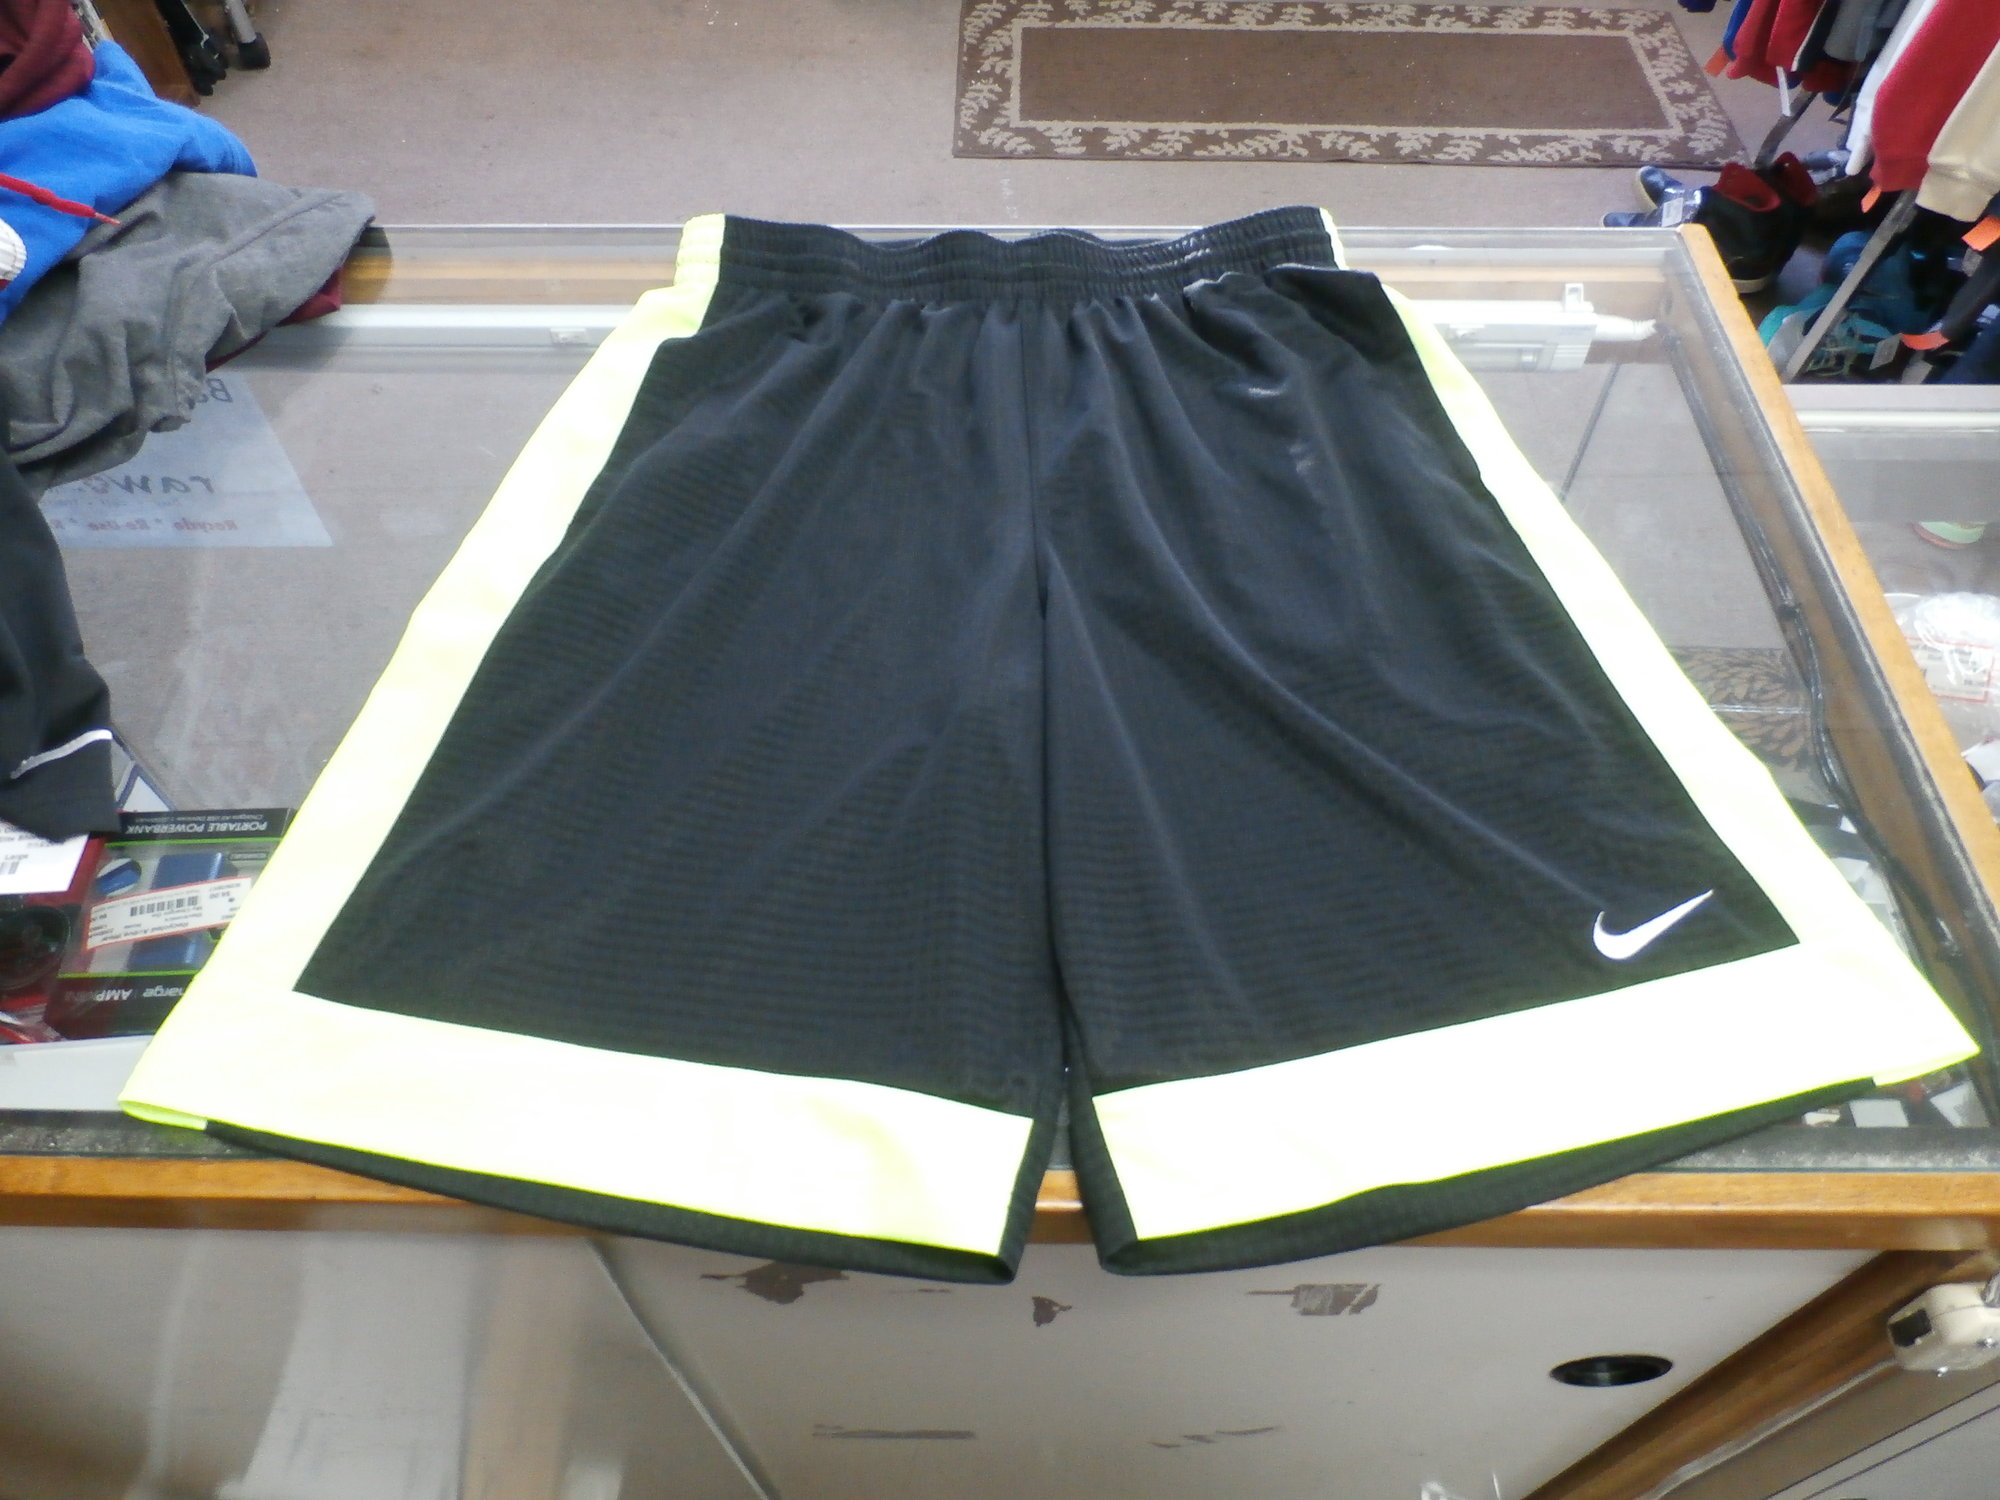 Nike Men's Basketball Shorts Size Size Large Black and Yellow Polyester #23965
Rating: (see below) 3 - Good Condition
Team: N/A
Player:  N/A
Brand: Nike
Size: Men's - Large( Measures: Waist 15\" ; Length 22\"; inseam 10.5\")
Color: Black
Style: basketball shorts; elastic waist; pockets; drawstring; Embroidered logo
Material: 100% Polyester
Condition: 2  - Great Condition; wrinkled; material looks and feels great; clean and crisp; lightly used or well taken care of; no stains rips or holes
Item #: 23965
Shipping: FREE